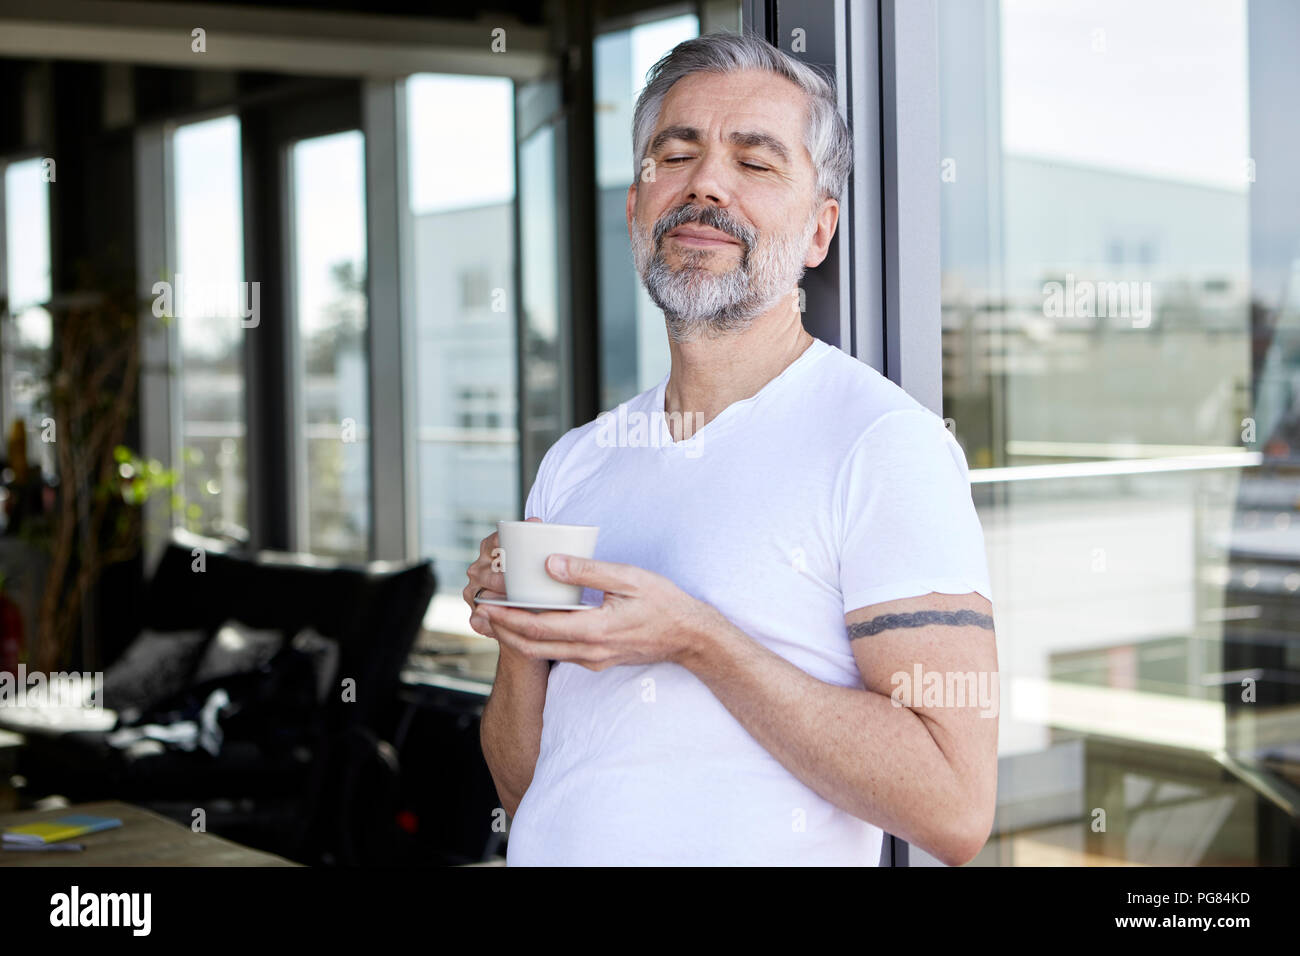 Man standing at French enjoying cup of coffee Stock Photo